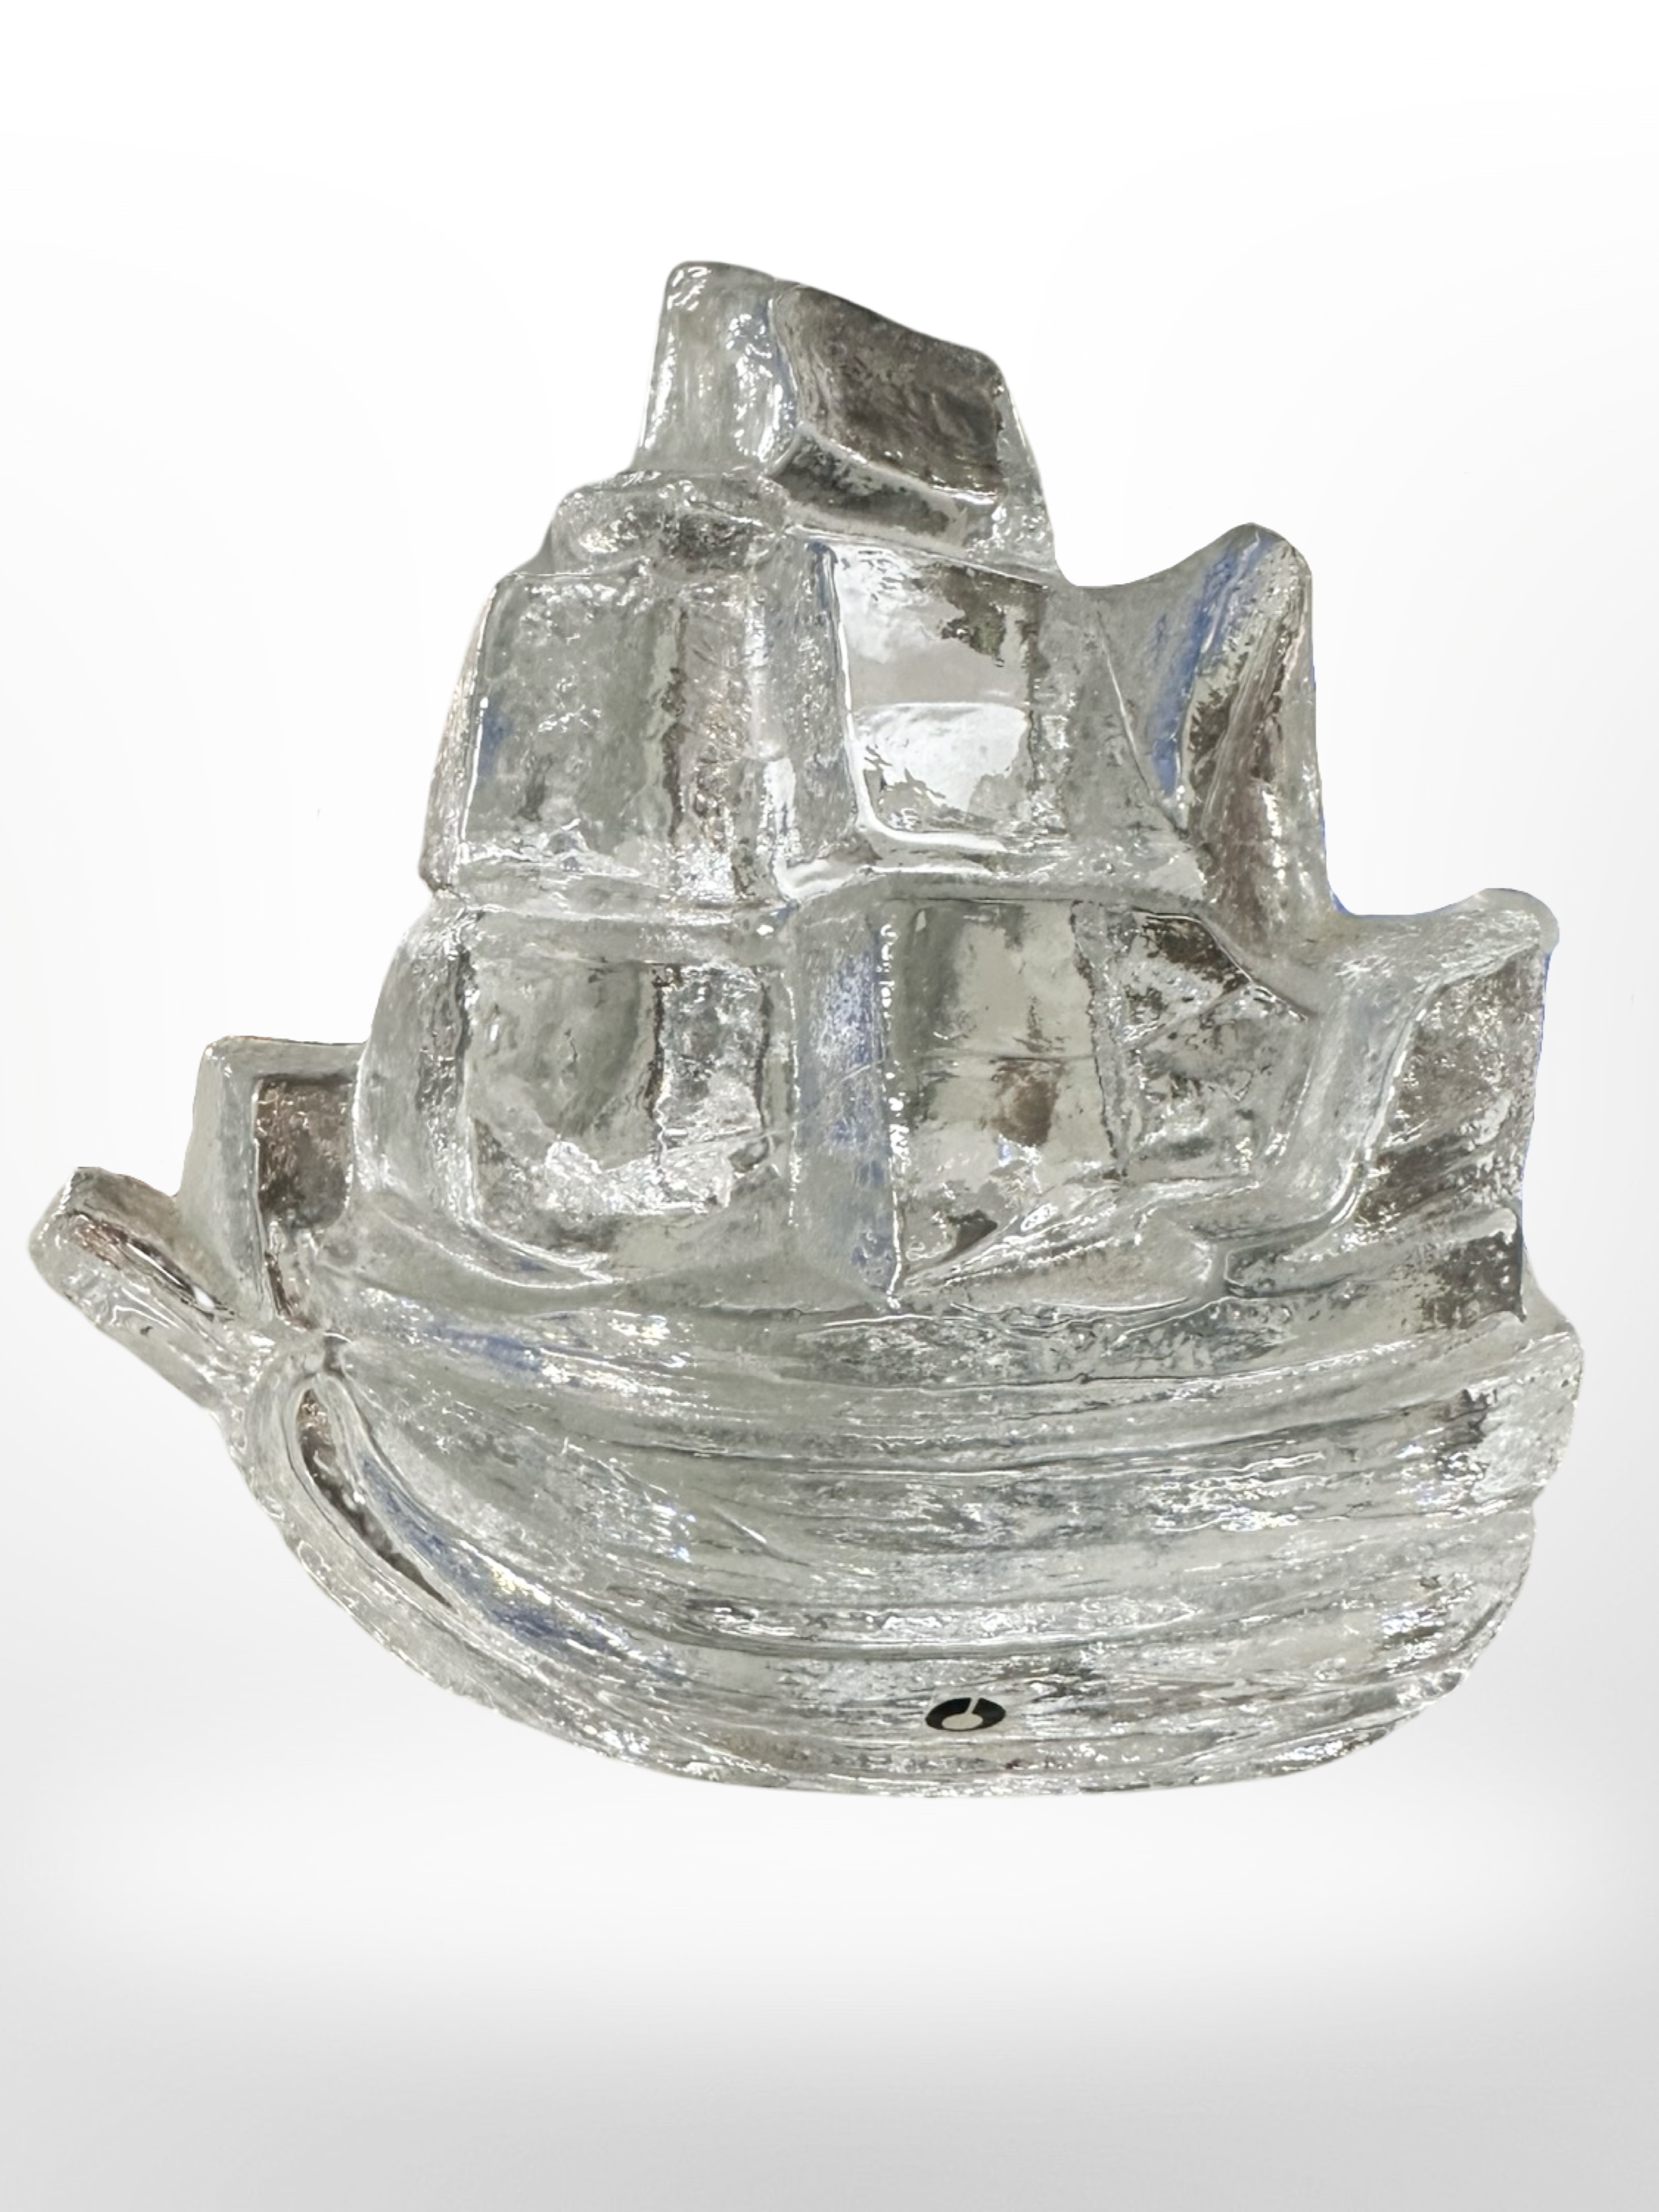 A Swedish Westerberg design solid glass paperweight in the form of a galleon.